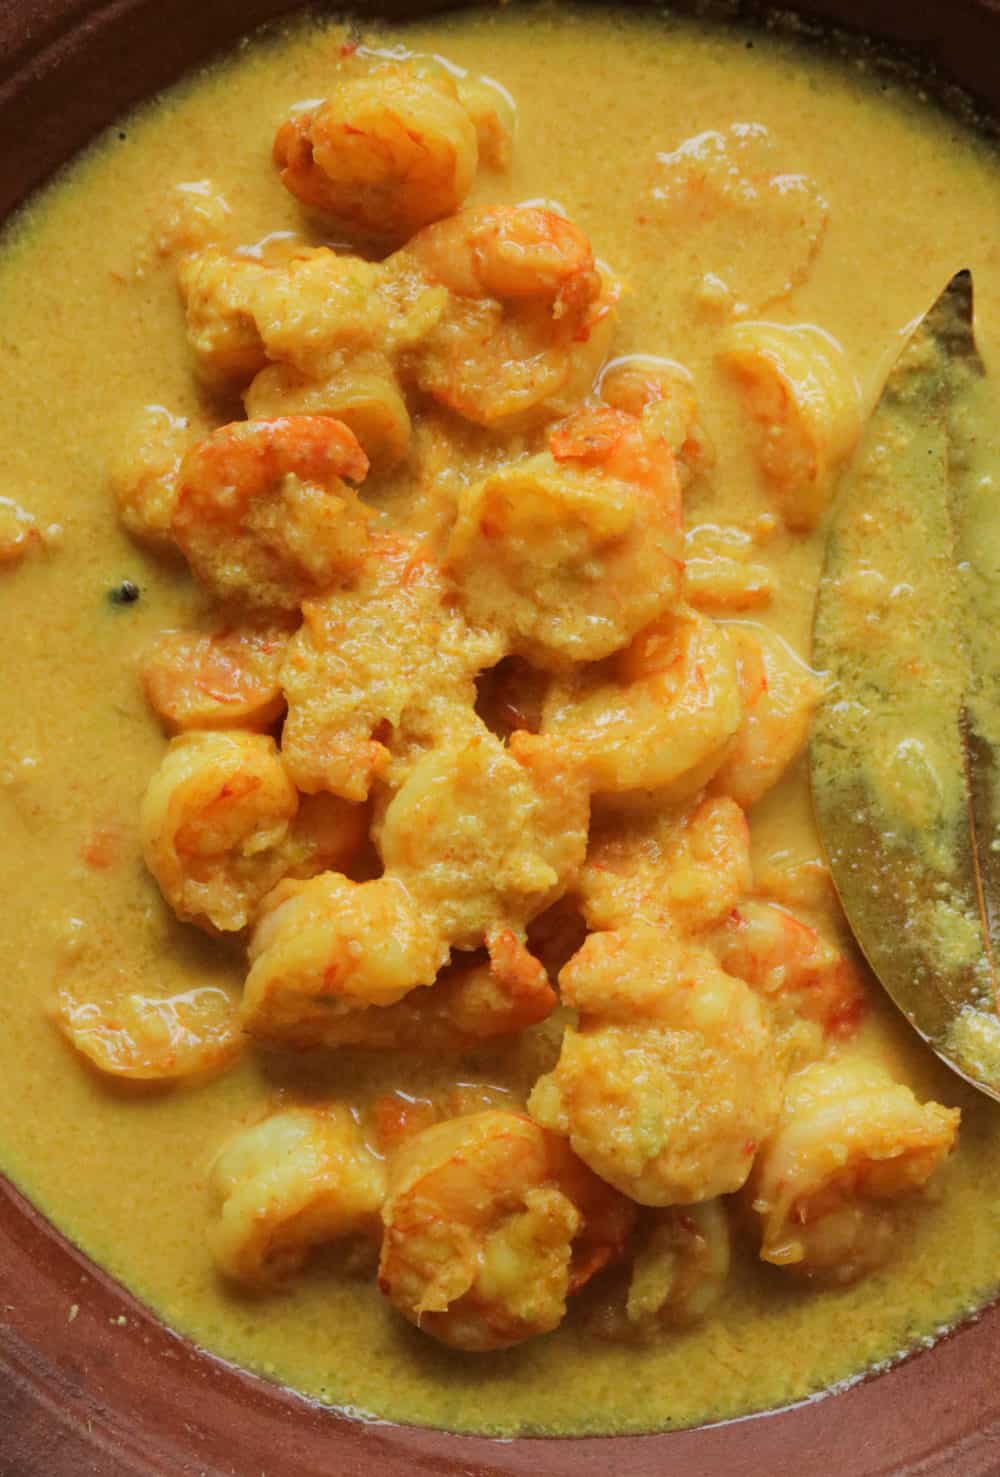 cooked prawn malai curry in a dish.